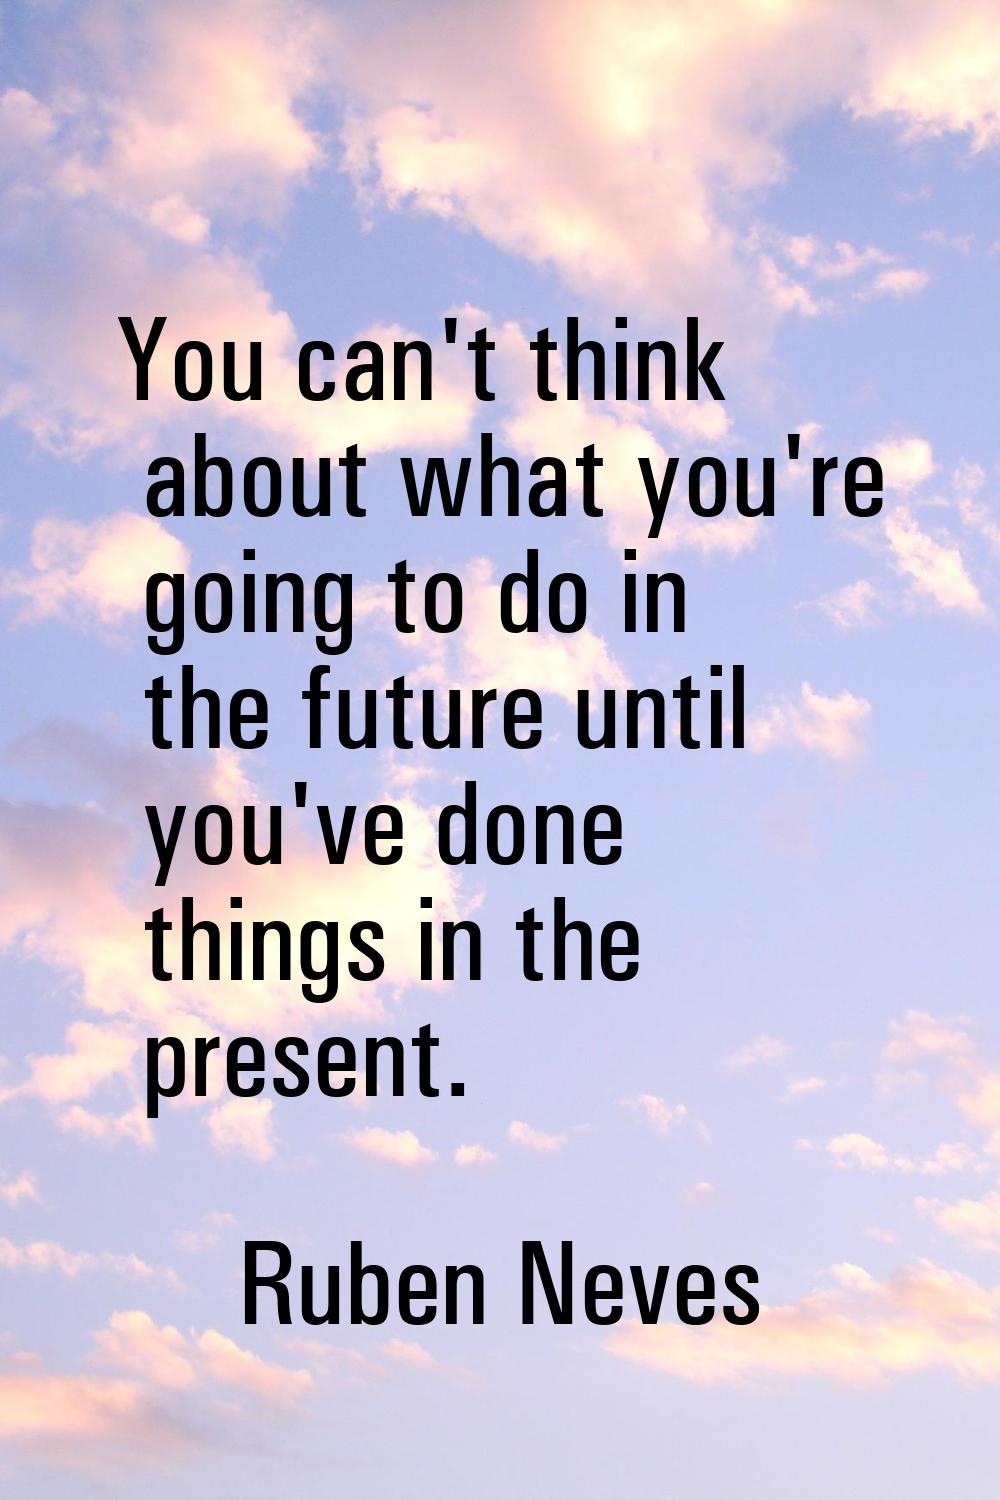 You can't think about what you're going to do in the future until you've done things in the present